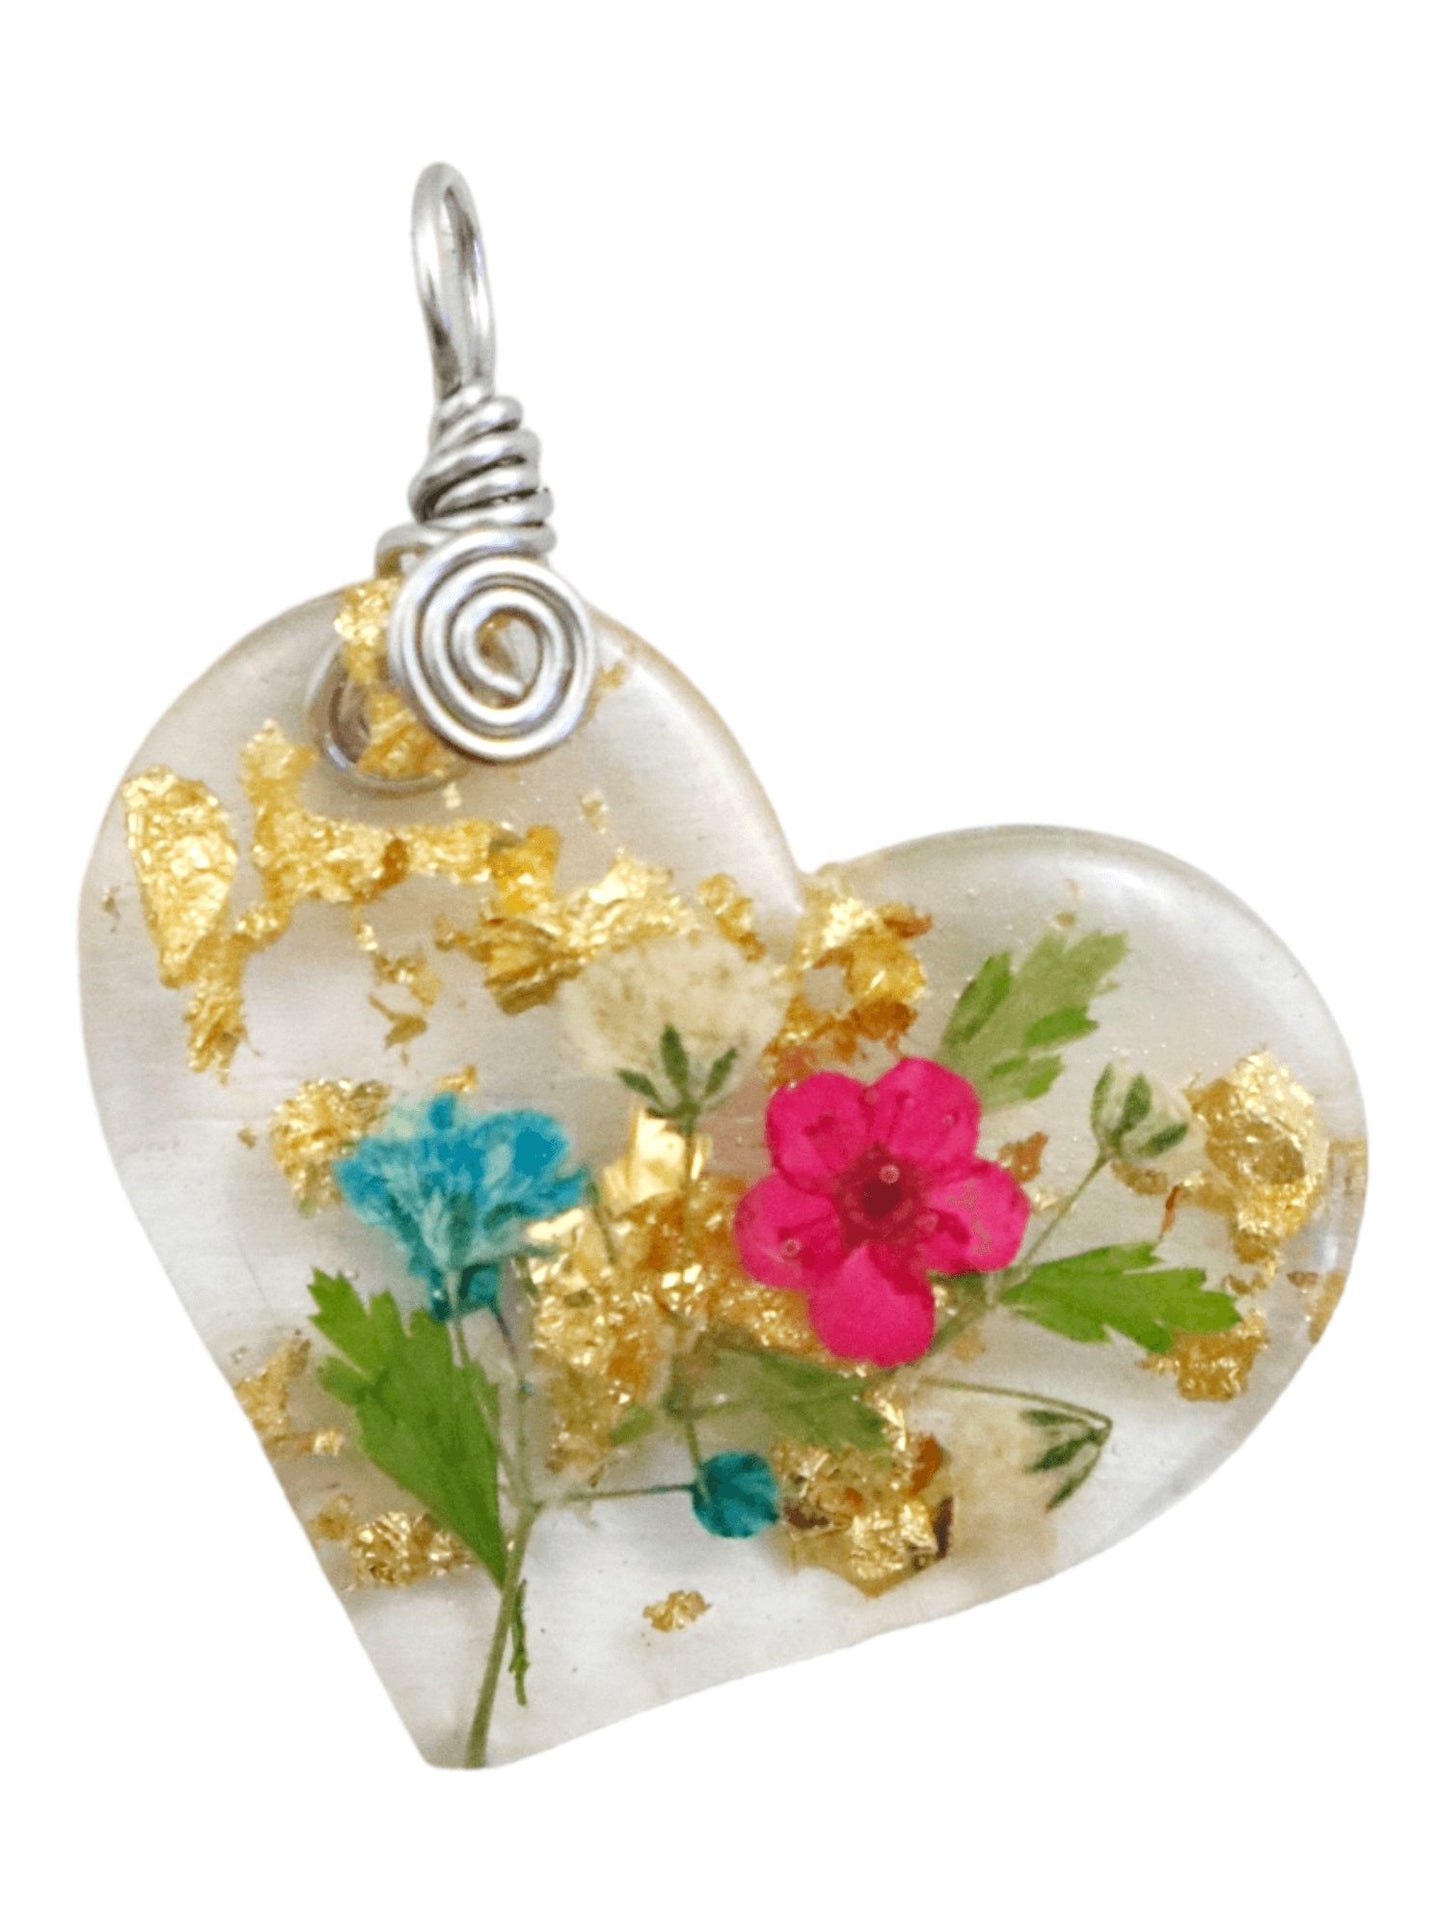 Heart-Resin-Pendant-With-Real-Flowers-and-Gold-Flakes-Kaleidoscopes-And-Polka-Dots